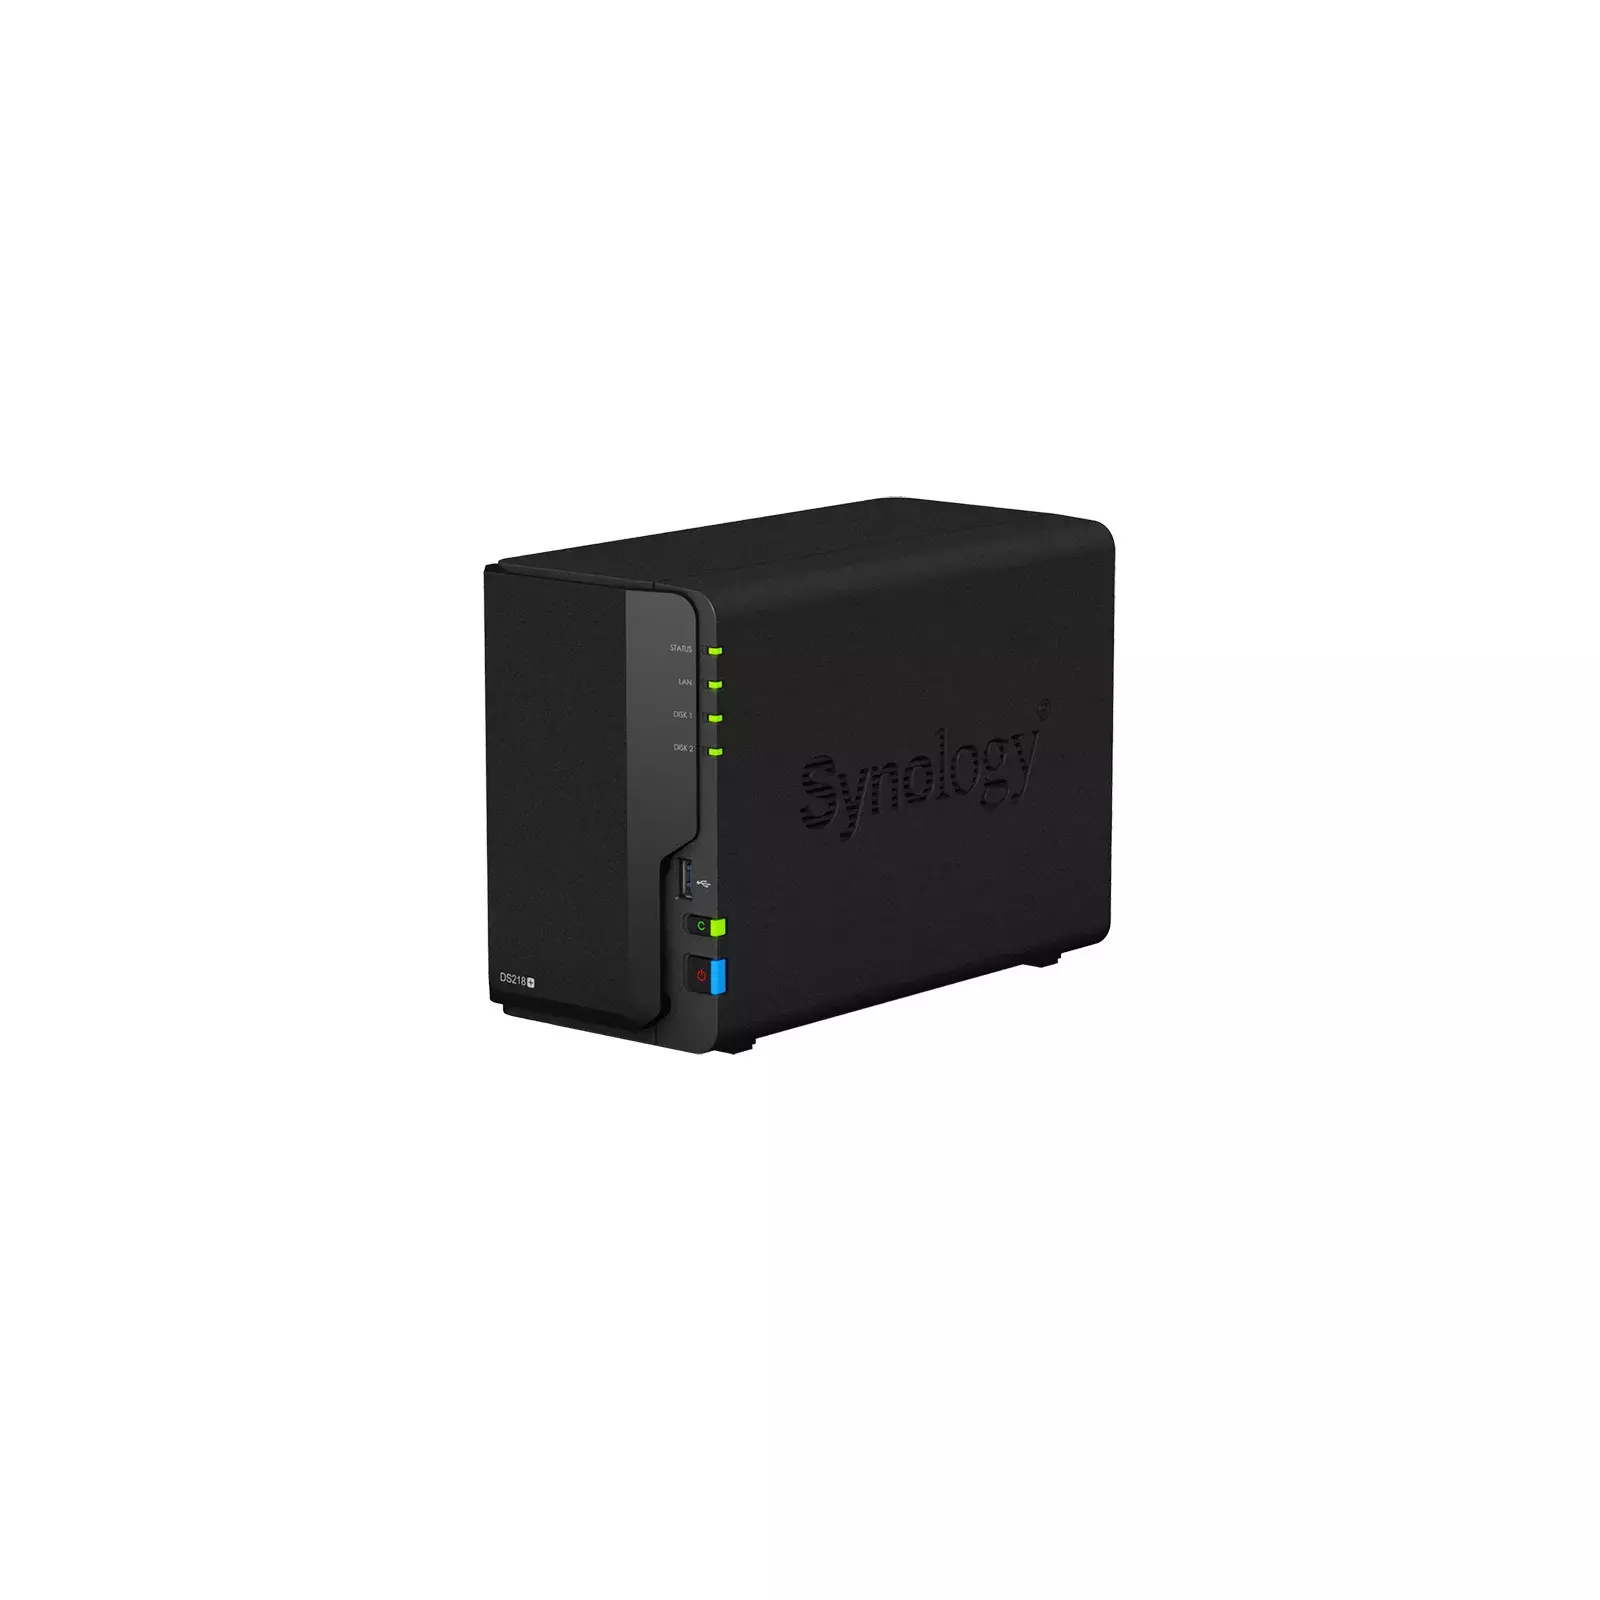 SYNOLOGY DS218+ Photo 2